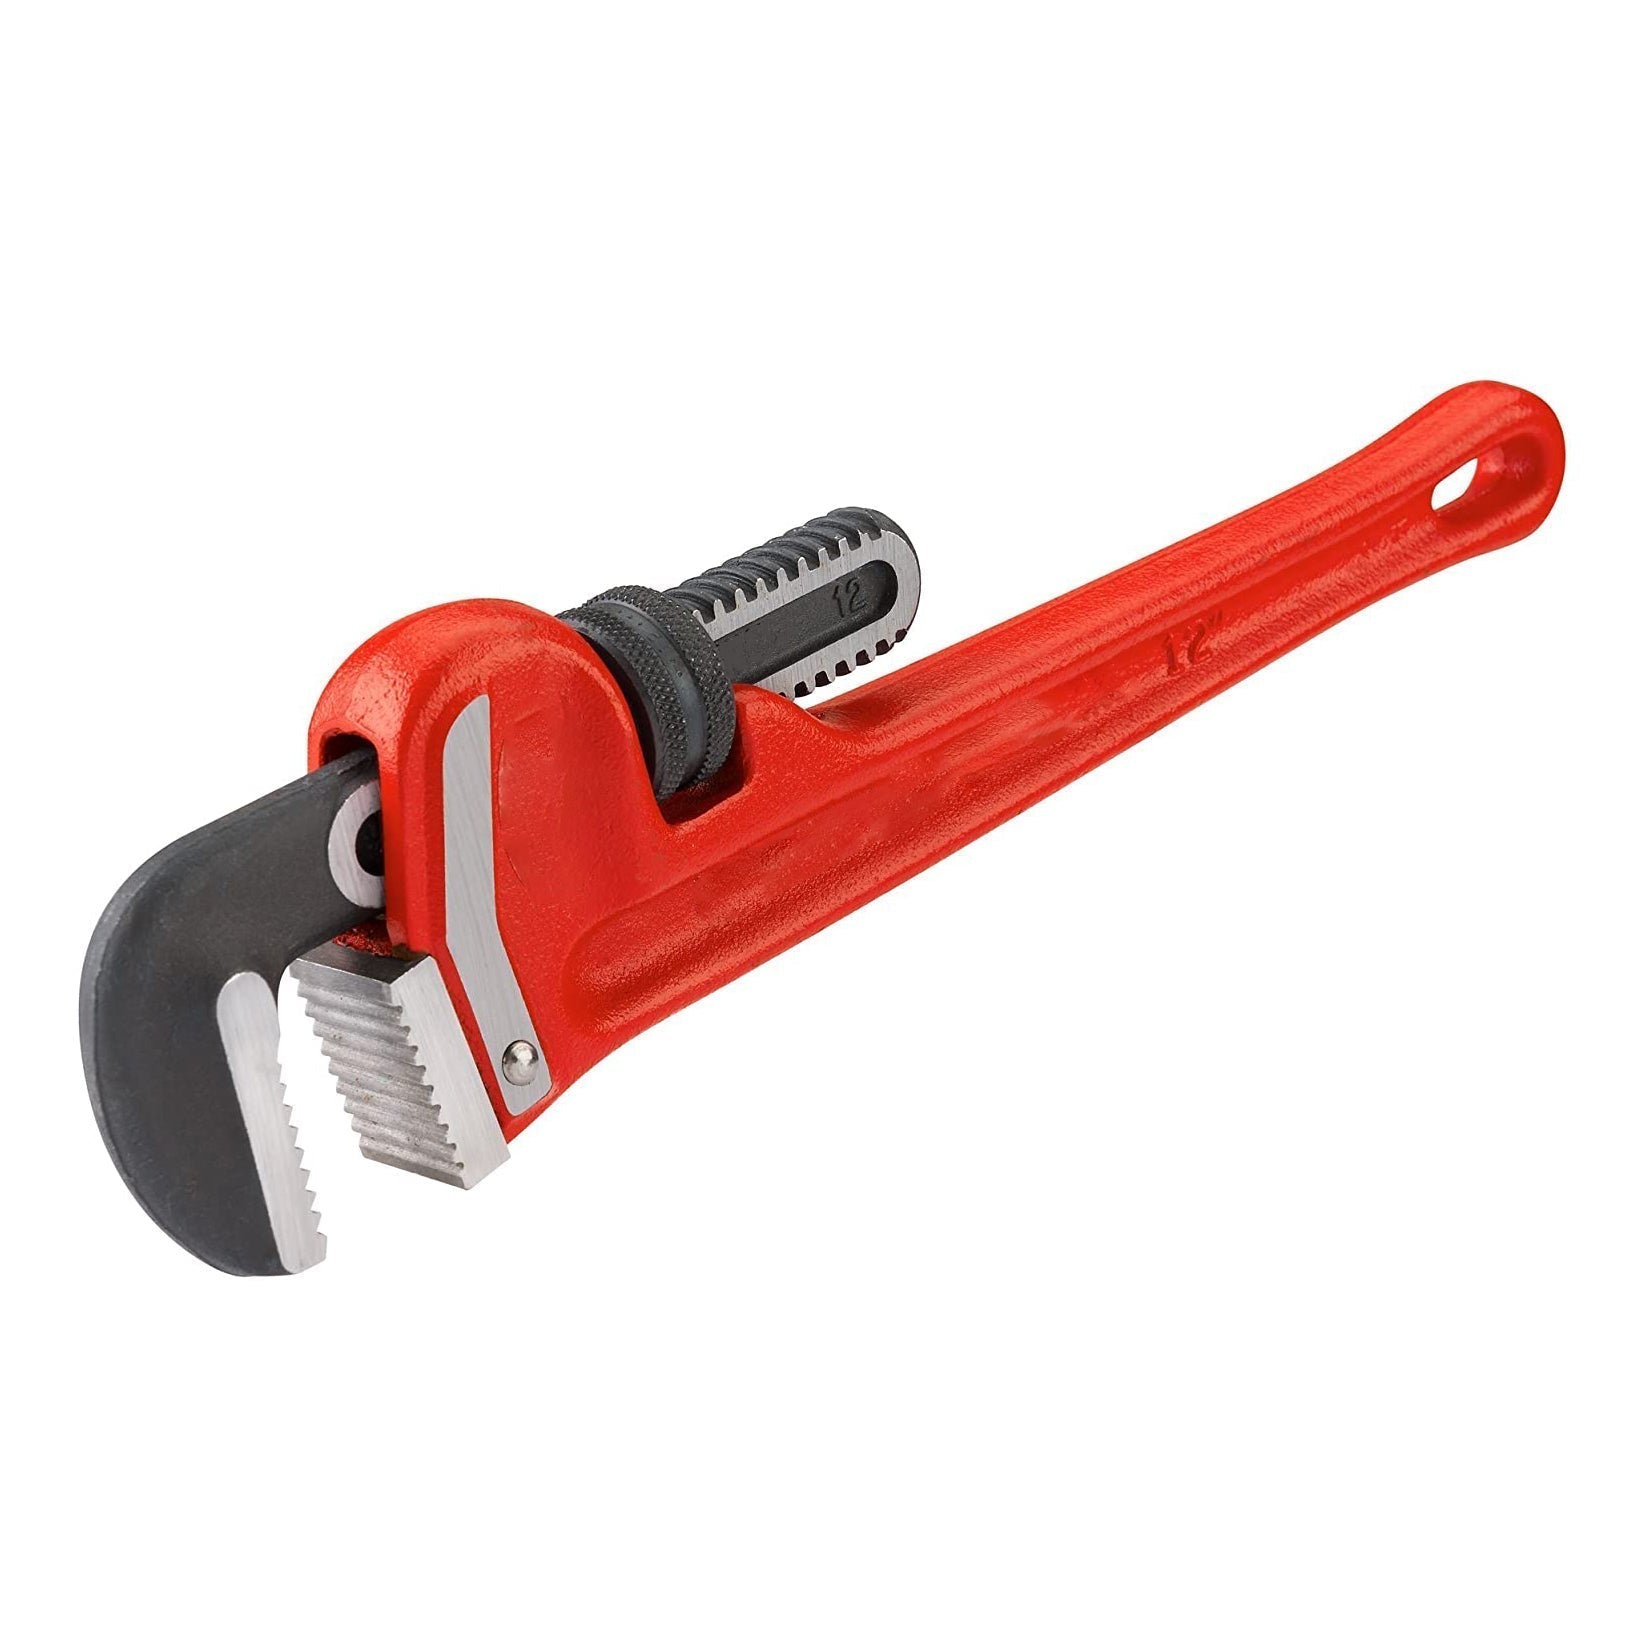 findmall  Heavy Duty Straight Pipe Wrench, 12 Inch Plumbing Wrench, Pipe Capacity 2 Inch, for Pipe Diameters of 1/2 Inch to 1-1/2 Inch FINDMALLPARTS